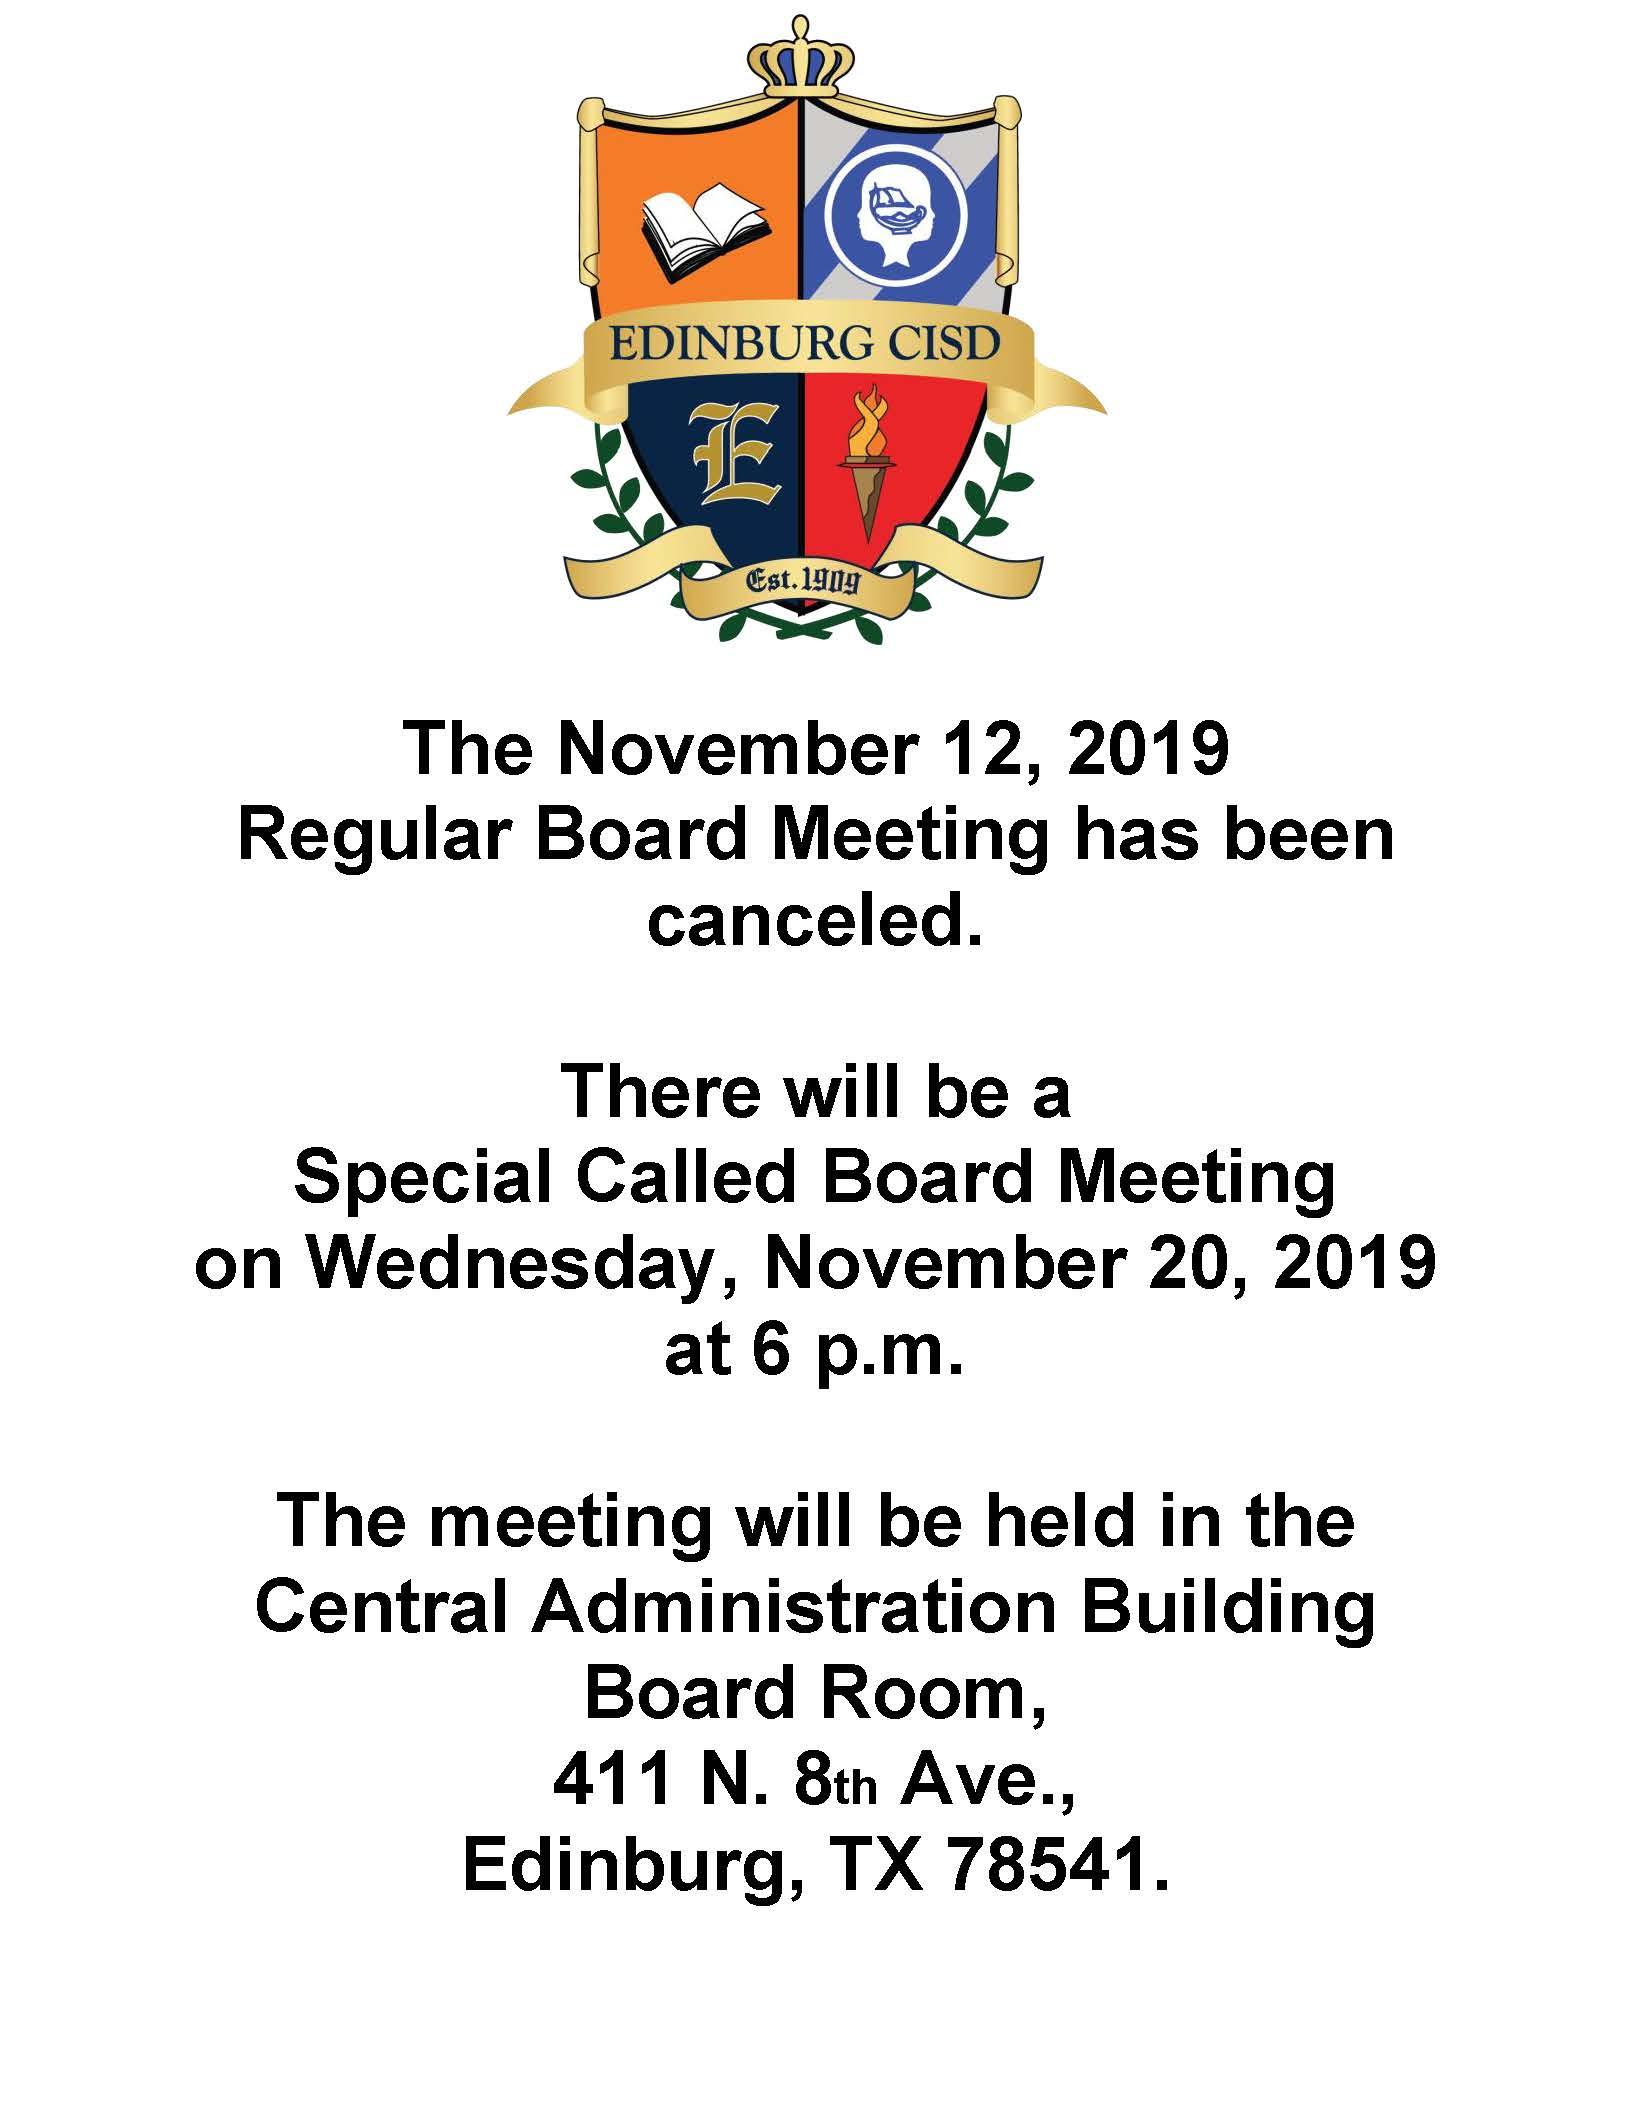 The November 12, 2019  Regular Board Meeting has been canceled.  There will be a  Special Called Board Meeting  on Wednesday, November 20, 2019  at 6 p.m.   The meeting will be held in the Central Administration Building Board Room, 411 N. 8th Ave., Edinburg, TX 78541.